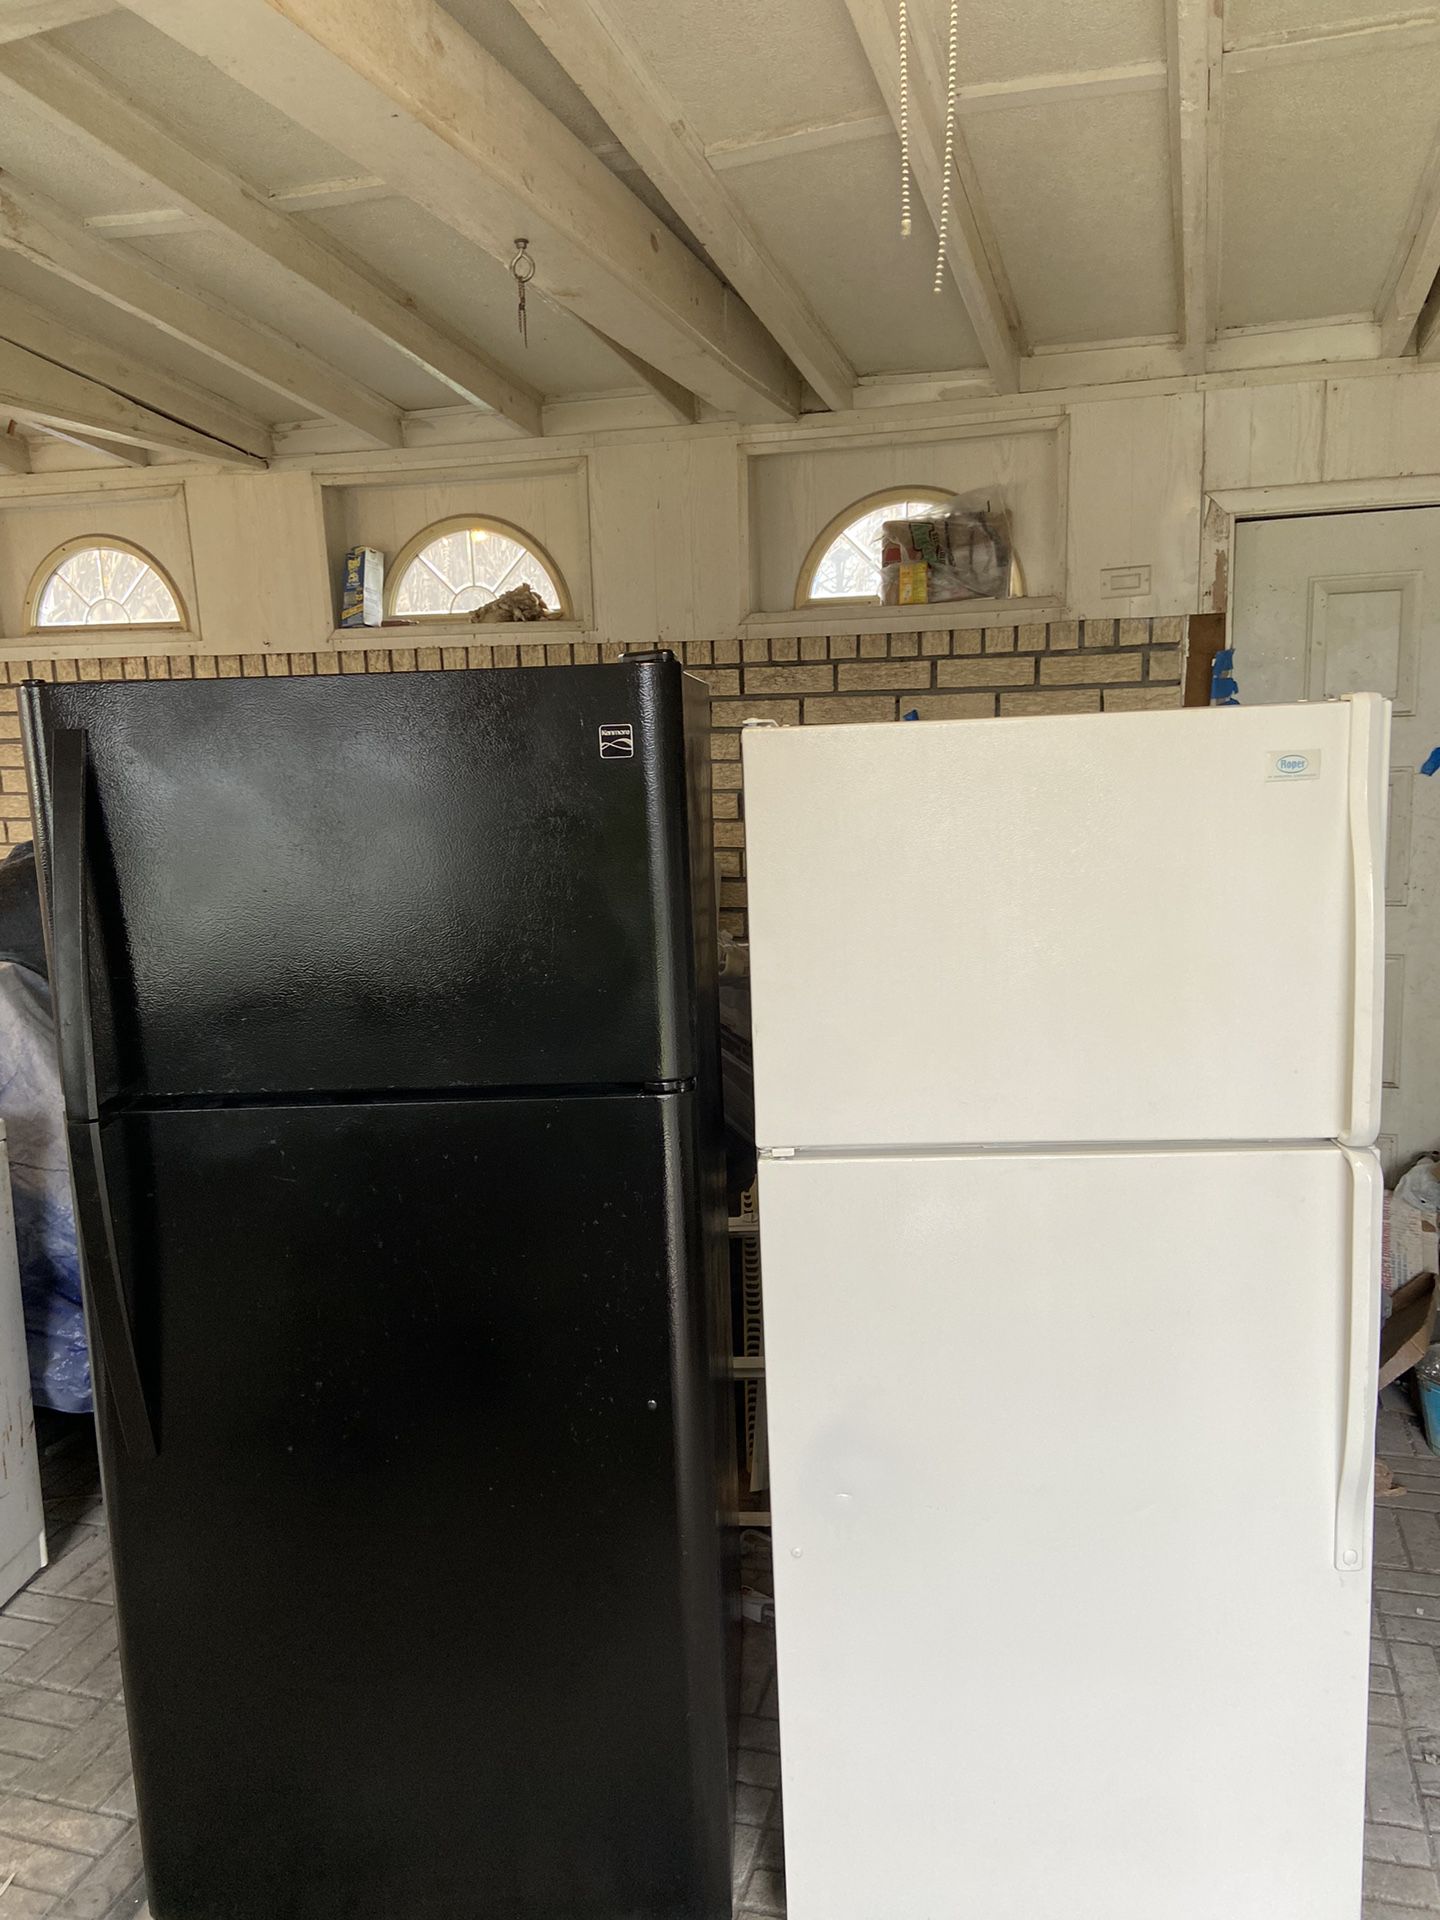 EXCELLENT RUNNING FRIDGES.$275 & UP. nothing missing on either.BOTH RUN LIKE BRAND NEW! BLACK IS 18 cu ft Kenmore $395. WHITE ONE IS WHIRLPOOL  $275. 